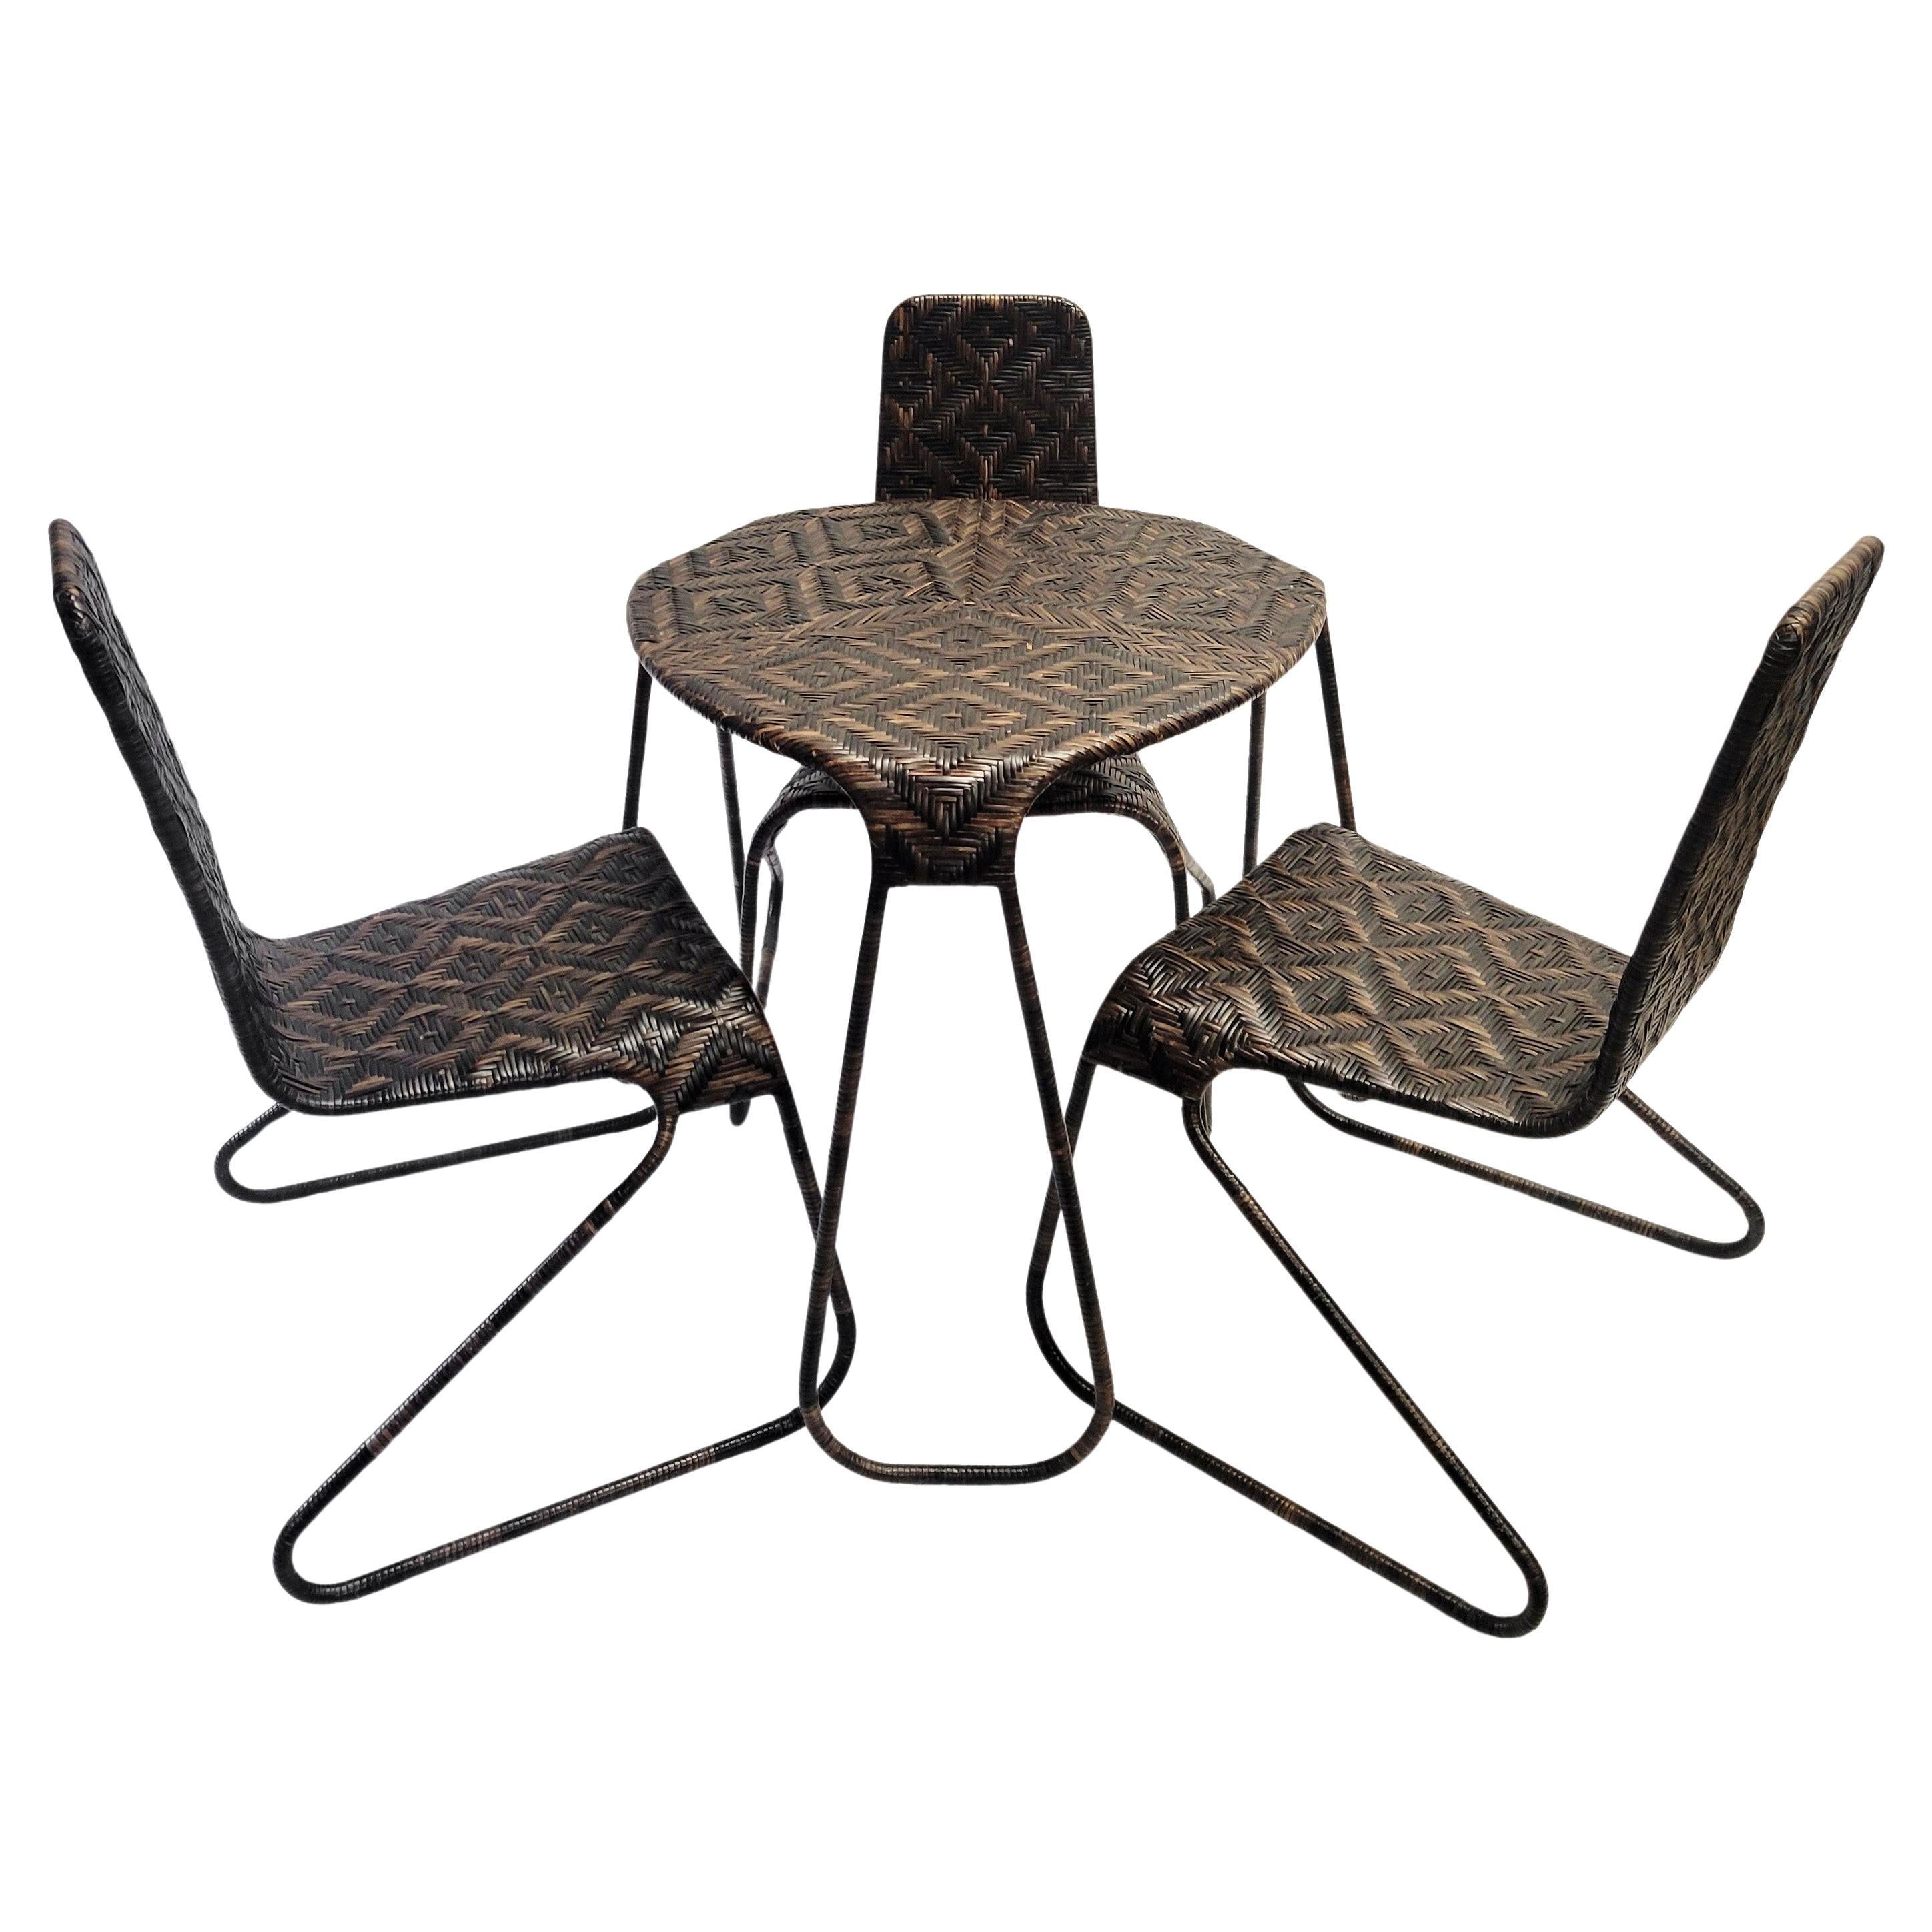 Set of Three Flo Chairs and Dining Table by Patricia Urquiola for Driade